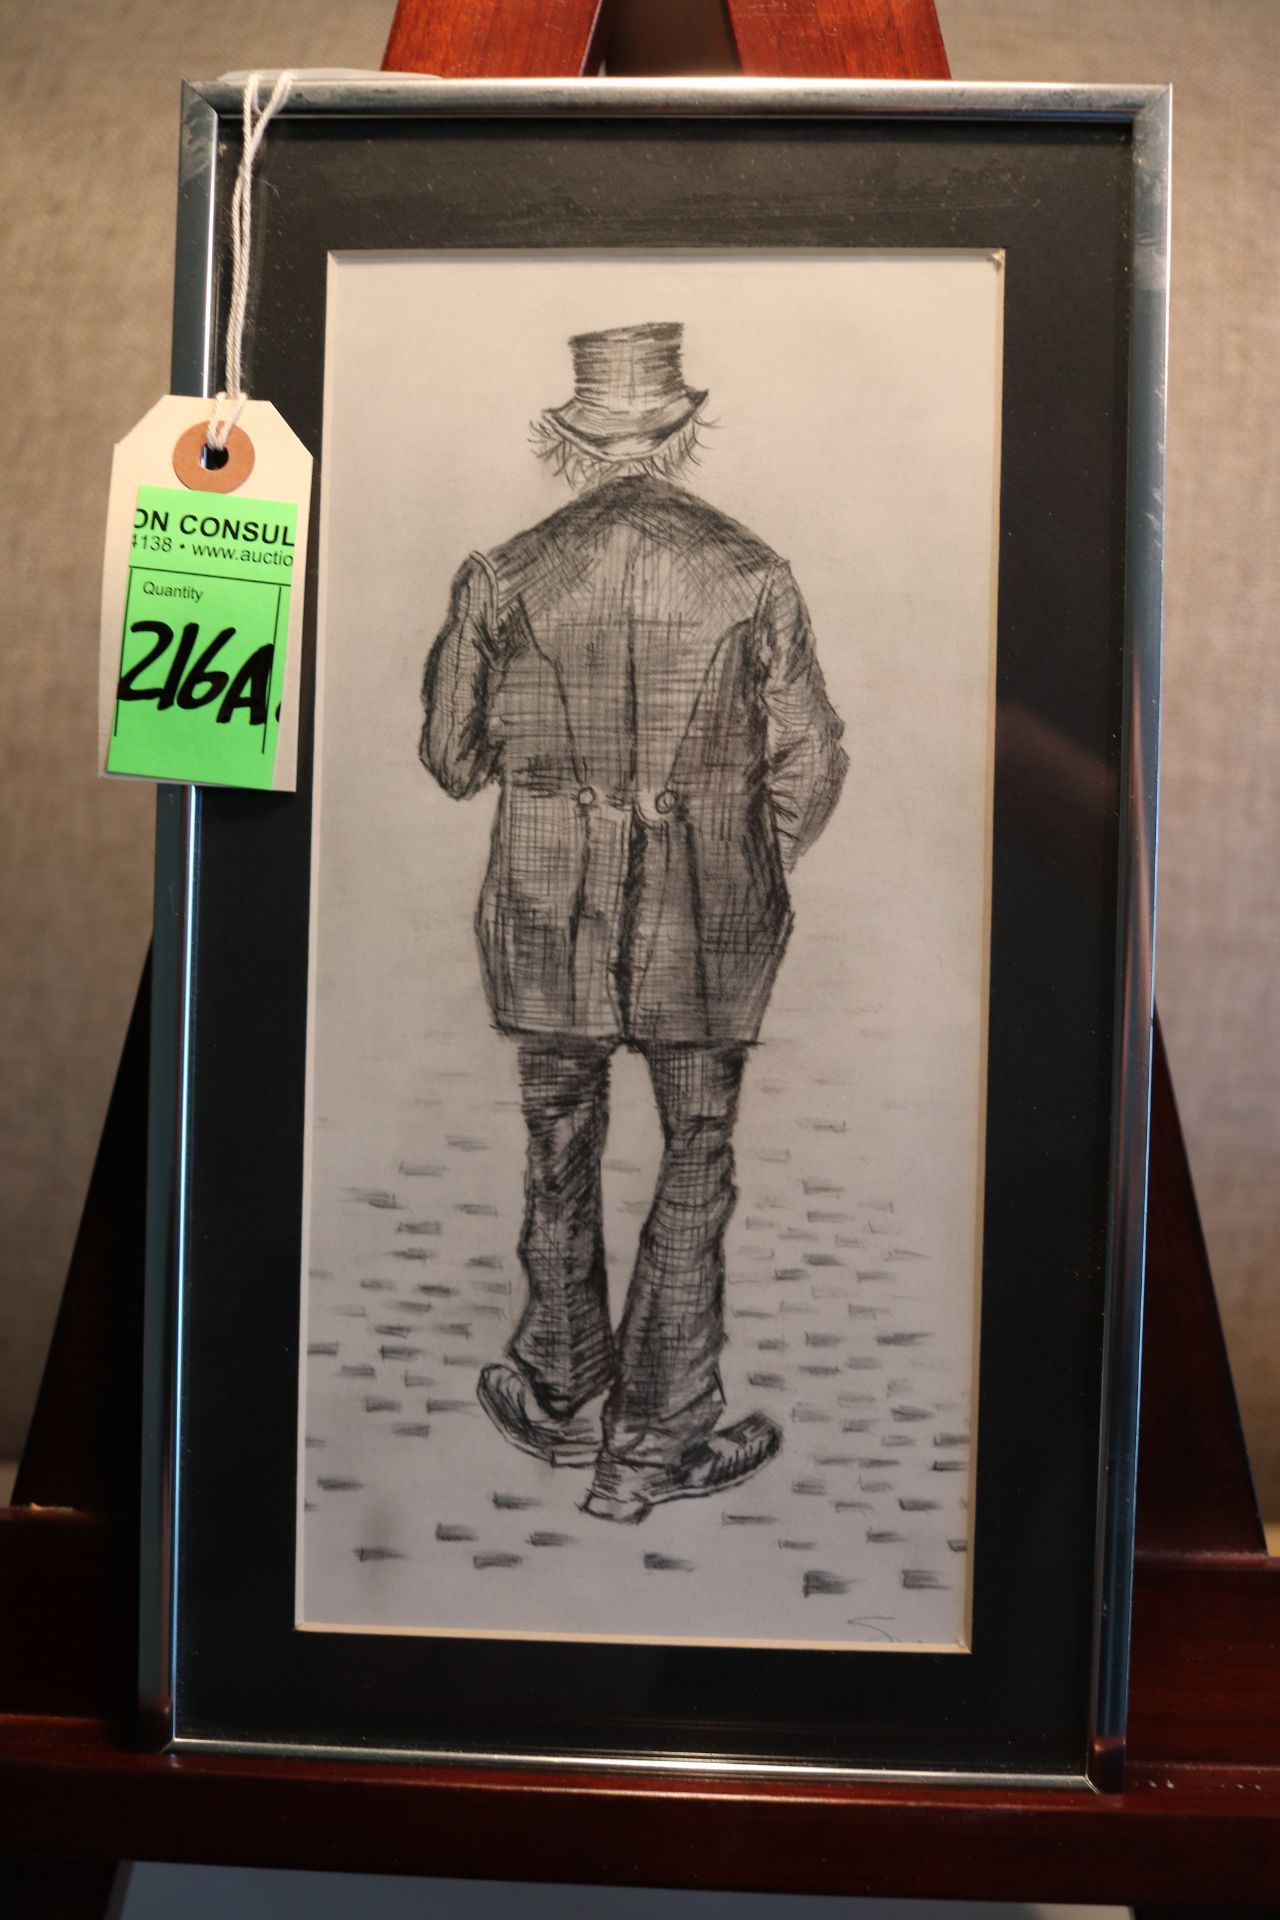 Framed artwork, original sketch depicting back of a man, signed by the artist Sue Morys, approximate